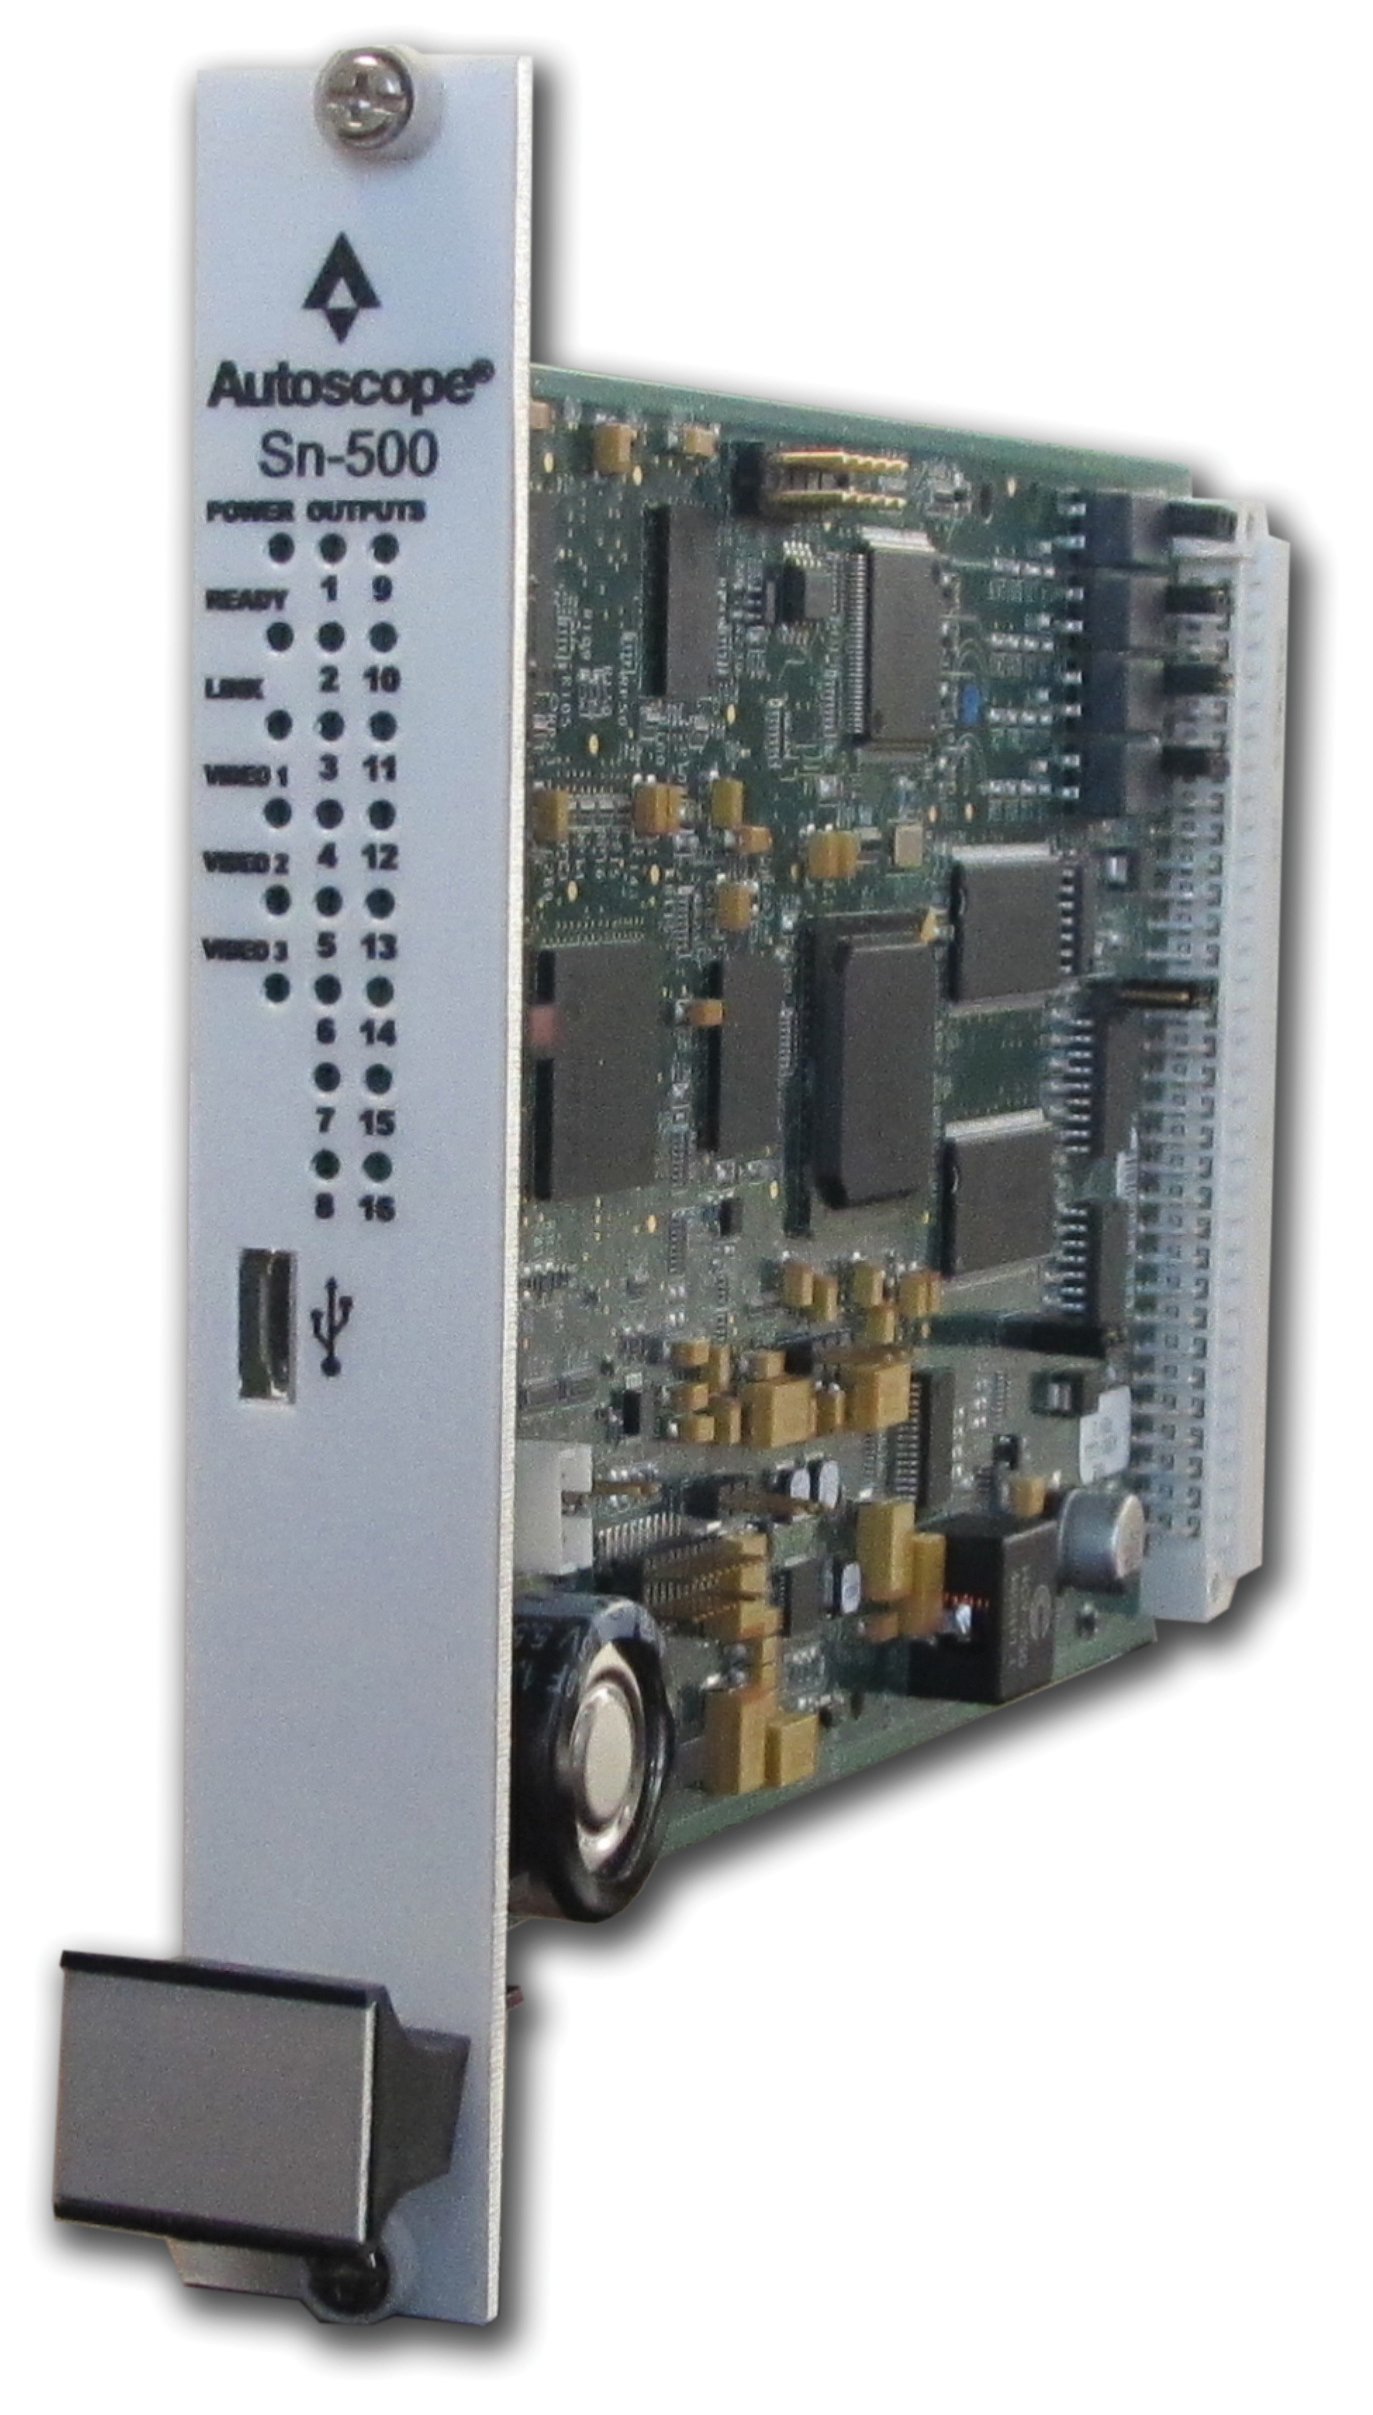 Image Sensing Systems’ Autoscope Sn-500